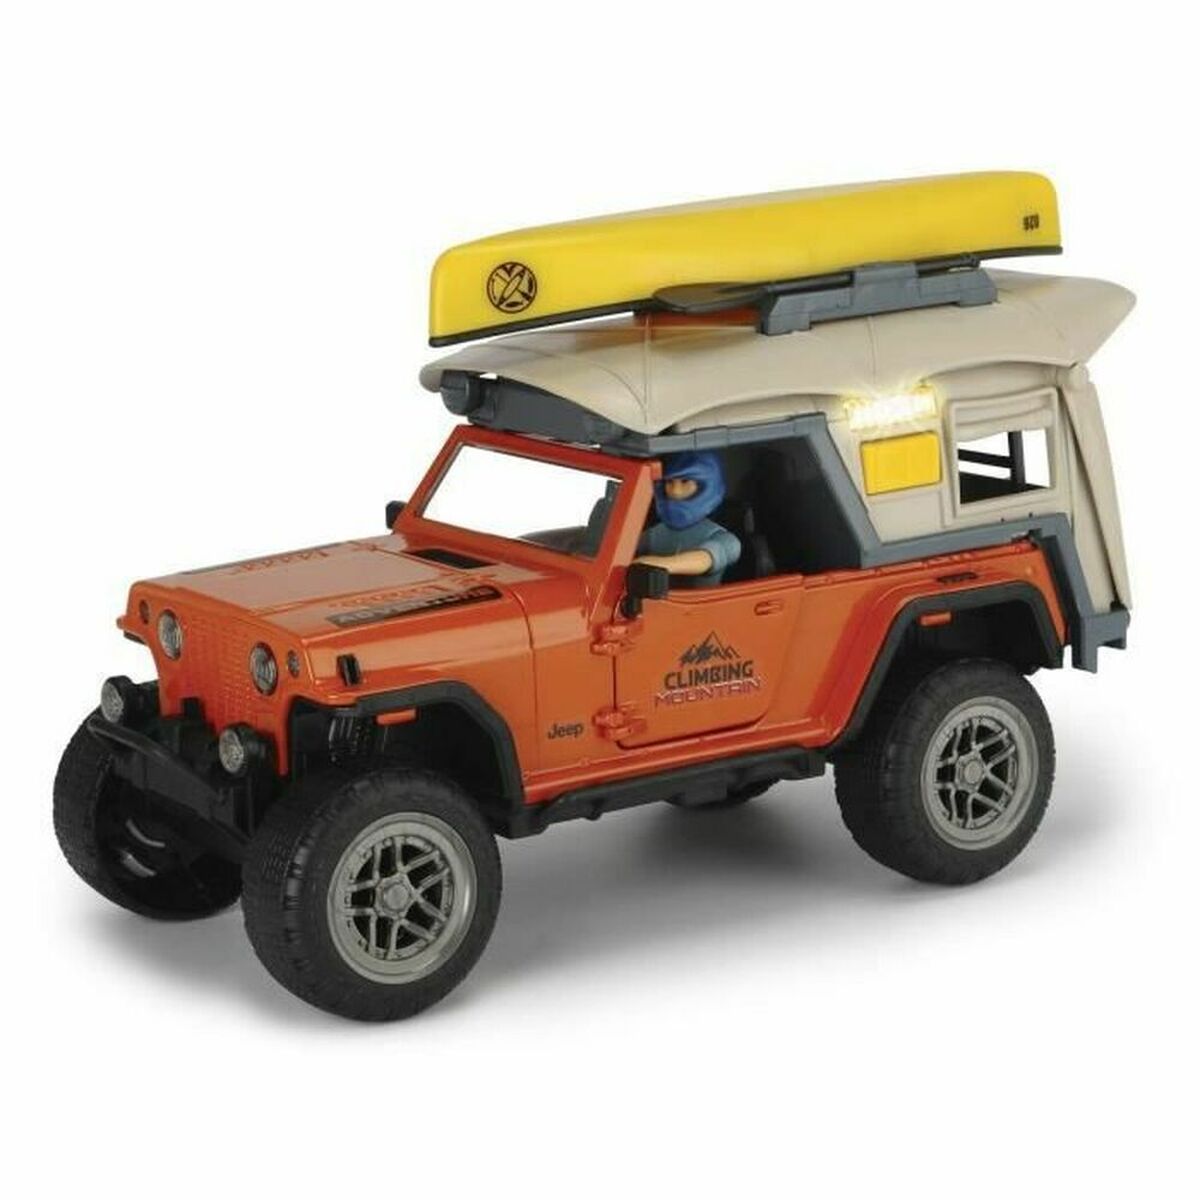 Petite voiture-jouet Dickie Toys Playlife Coffret Camping